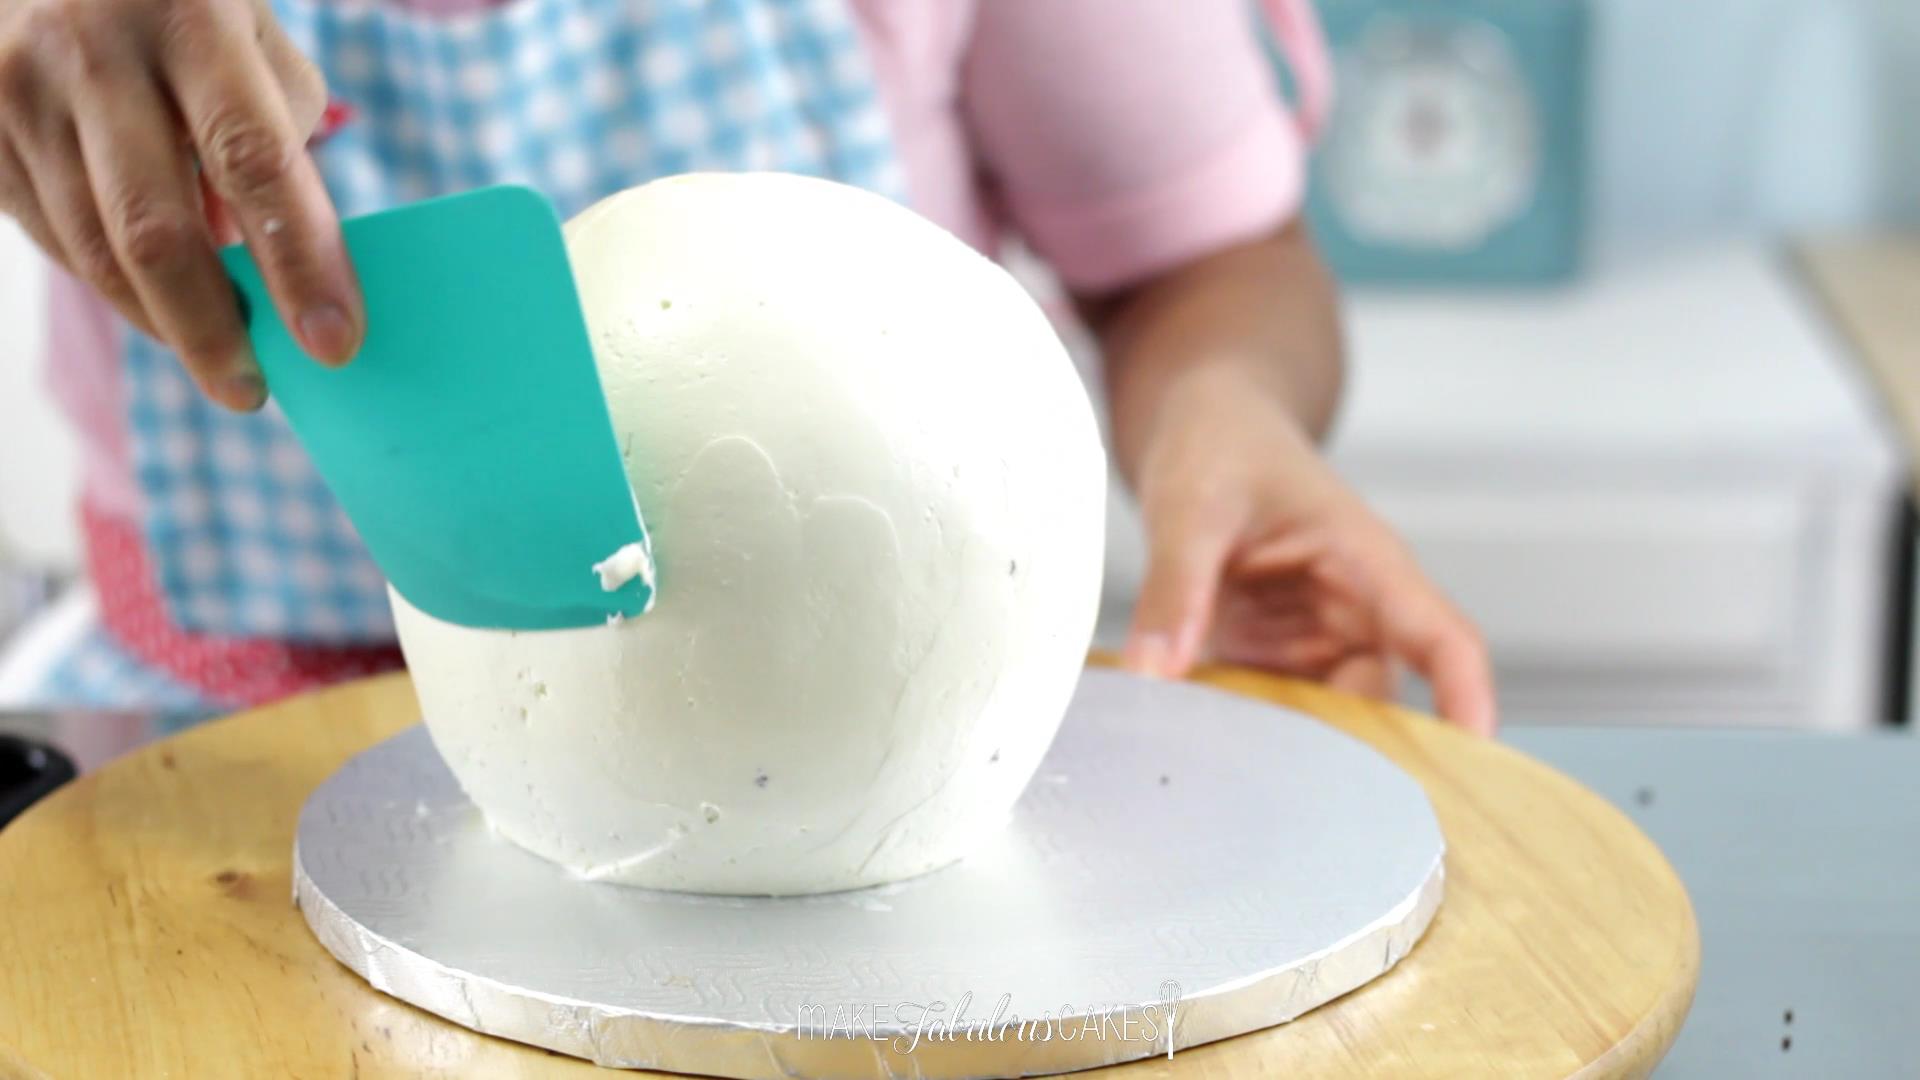 smoothing the ball cake with flexible plastic or acetate